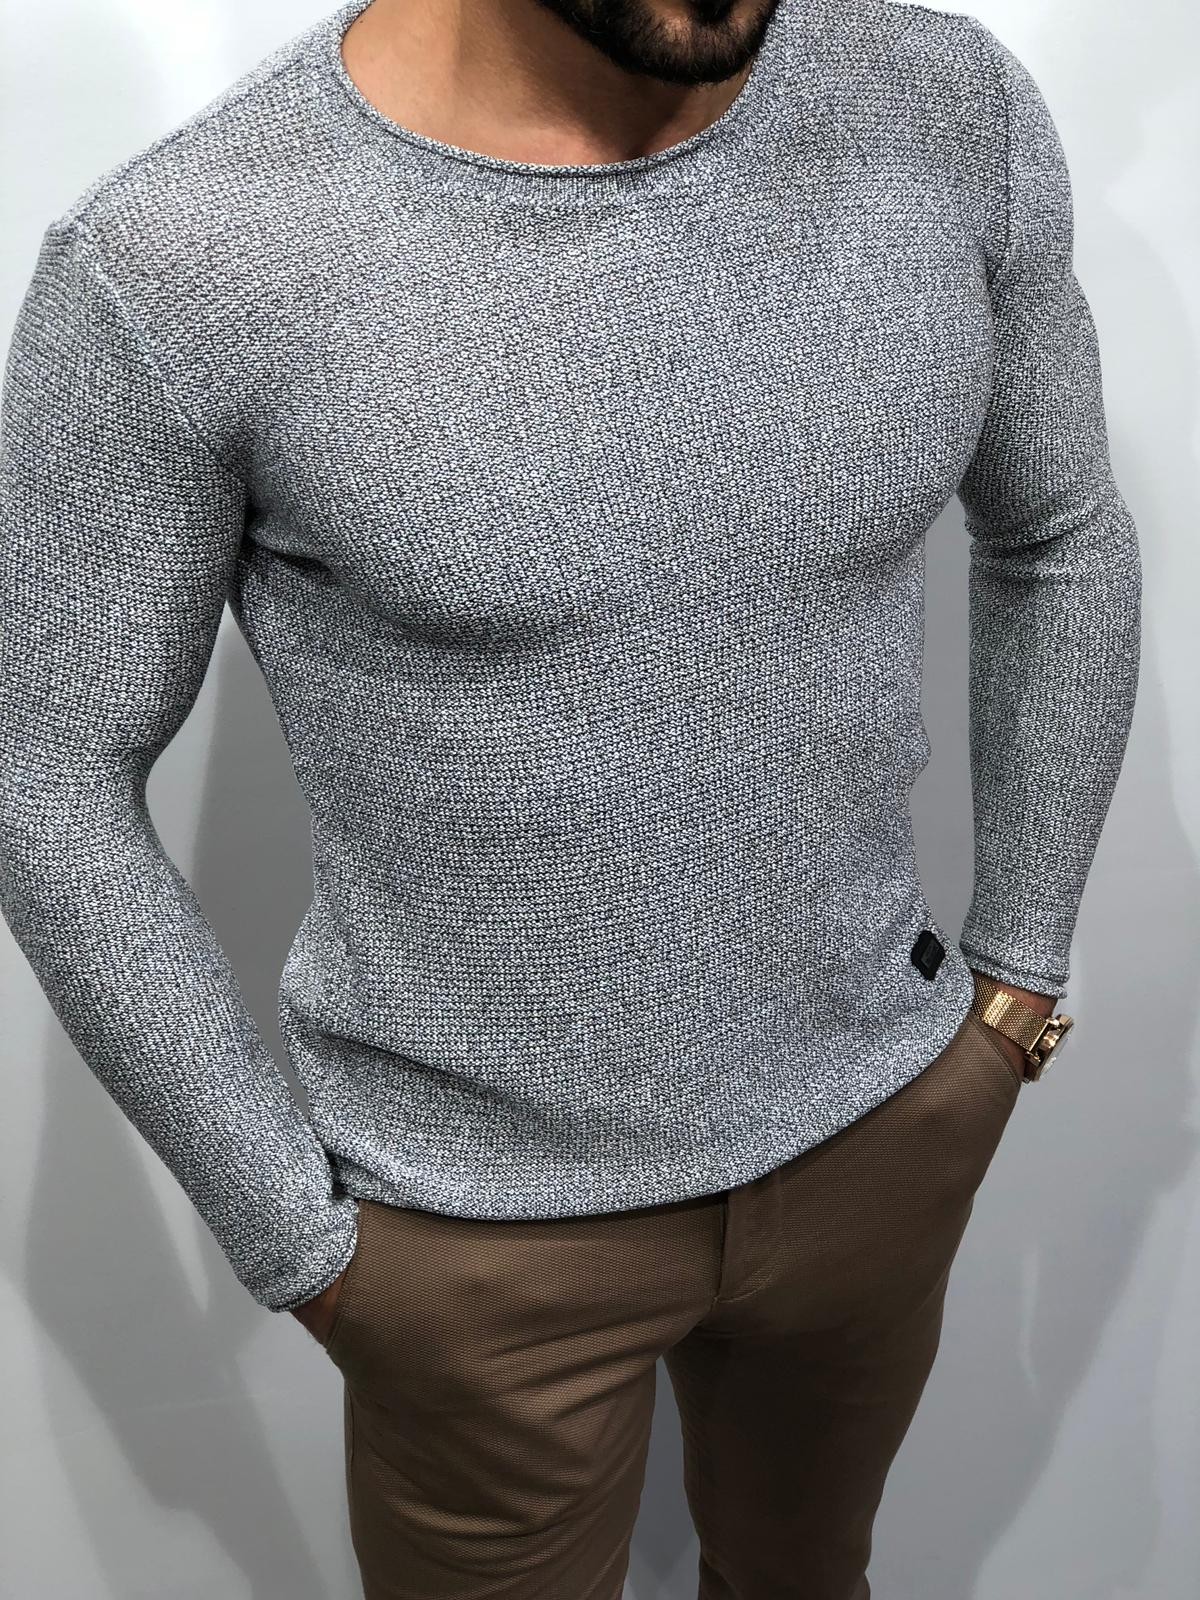 Buy Gray Slim Fit Sweater by Gentwith.com with Free Shipping